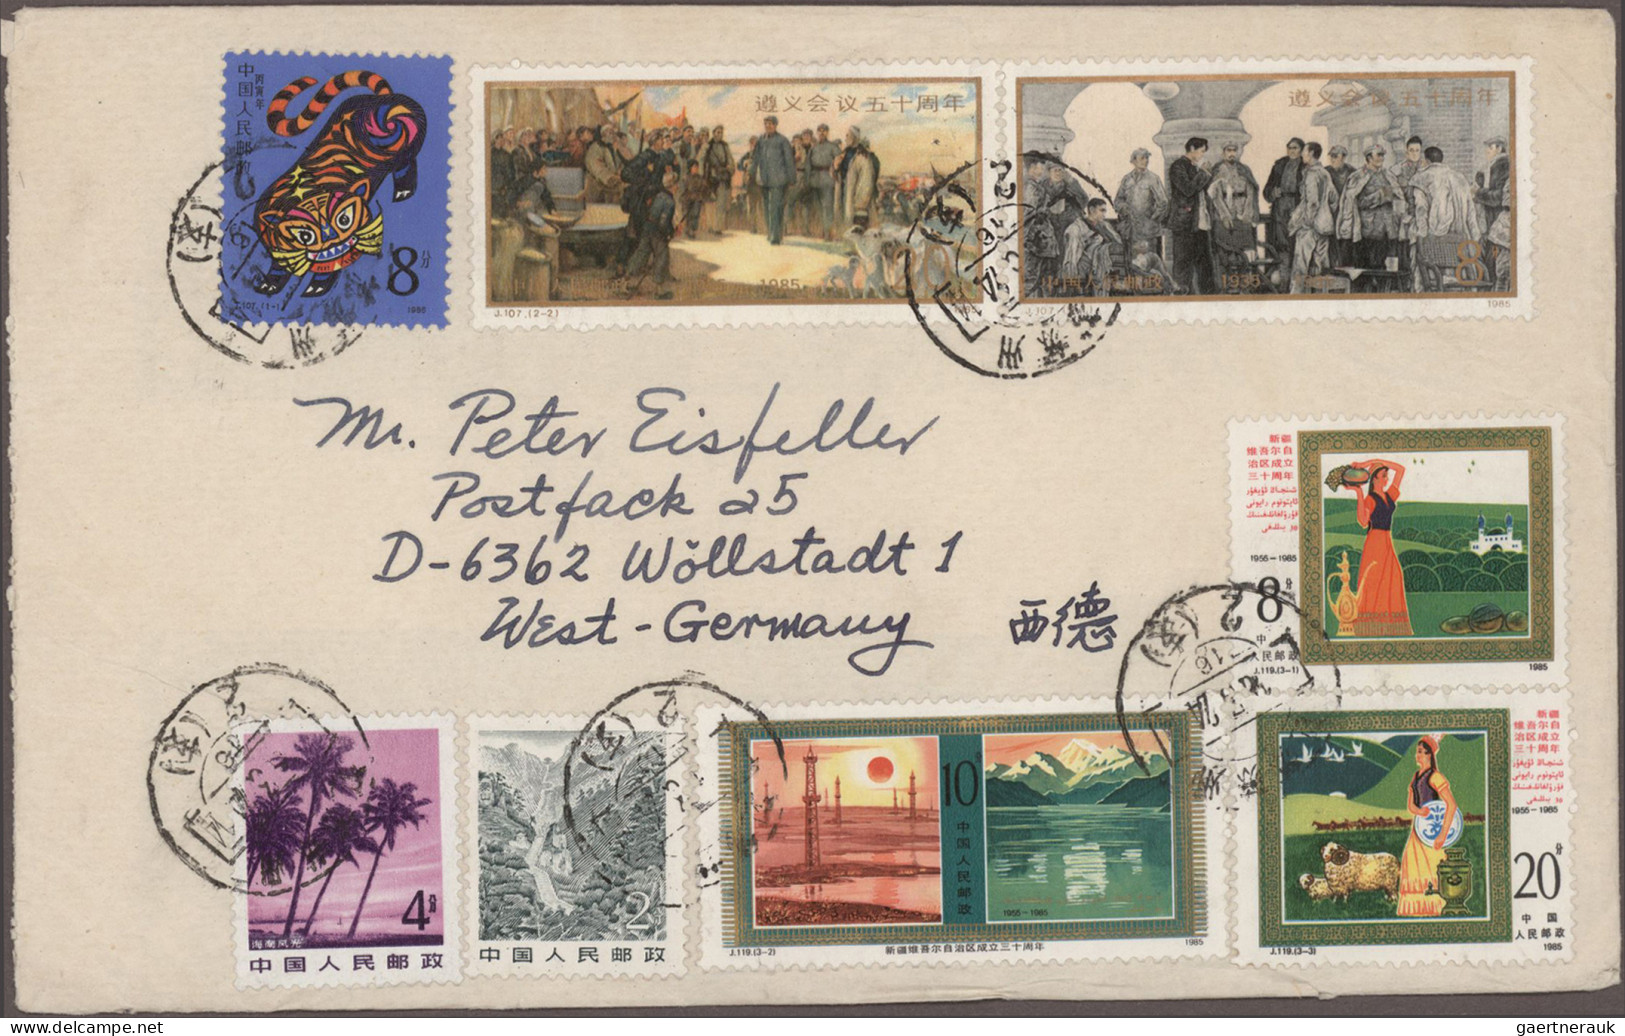 China: 1902/1996 (approx.), collection of covers and FDCs in album, including a